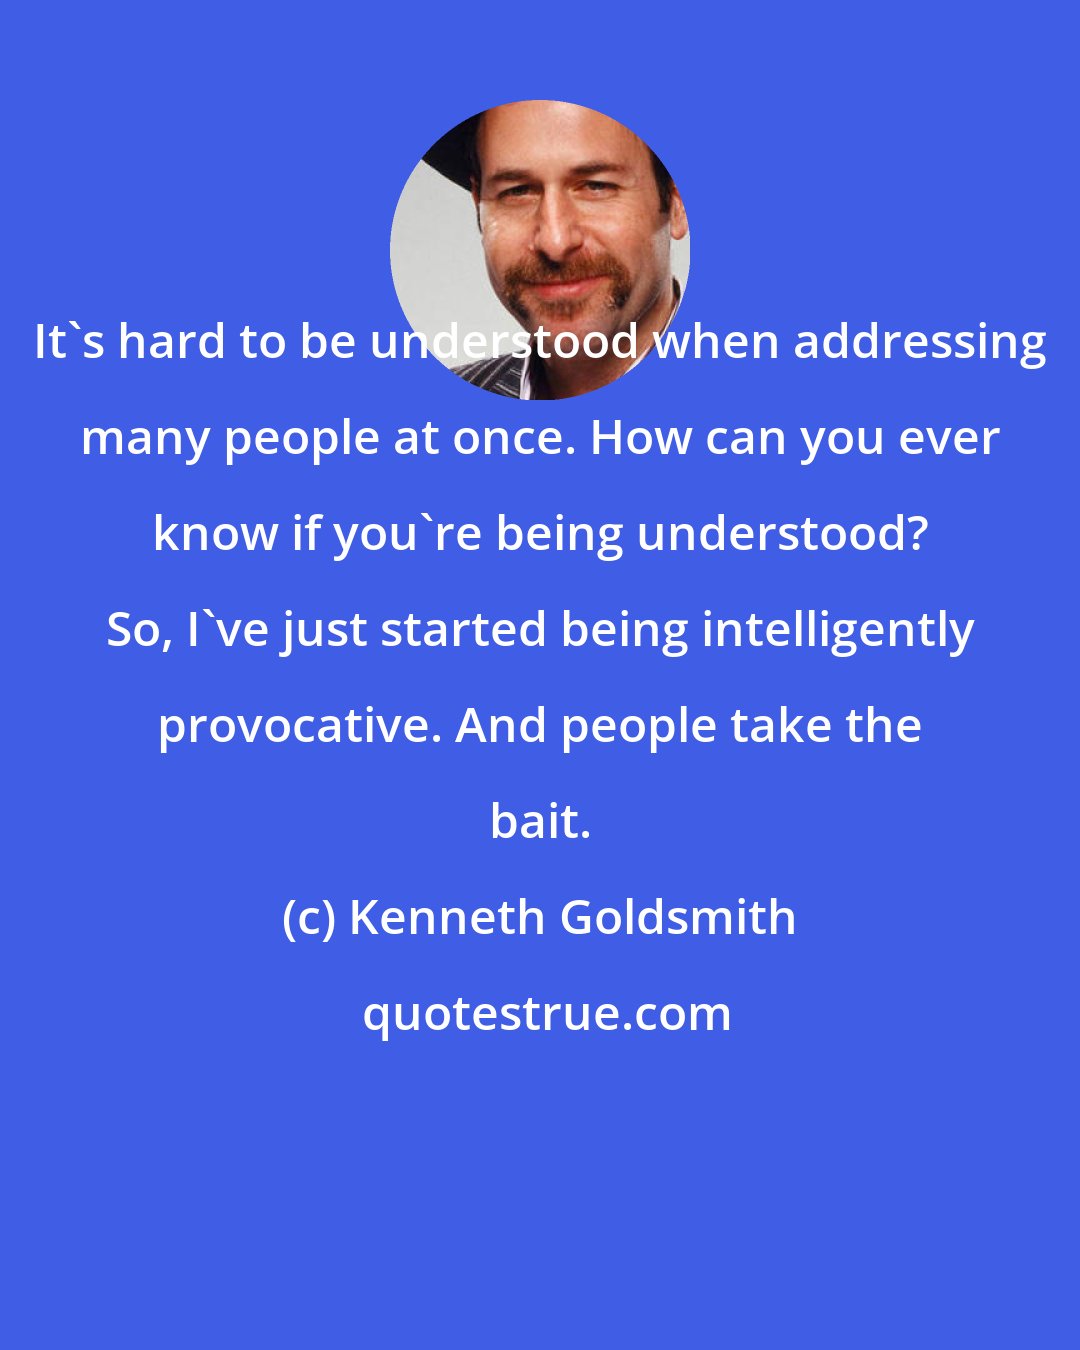 Kenneth Goldsmith: It's hard to be understood when addressing many people at once. How can you ever know if you're being understood? So, I've just started being intelligently provocative. And people take the bait.